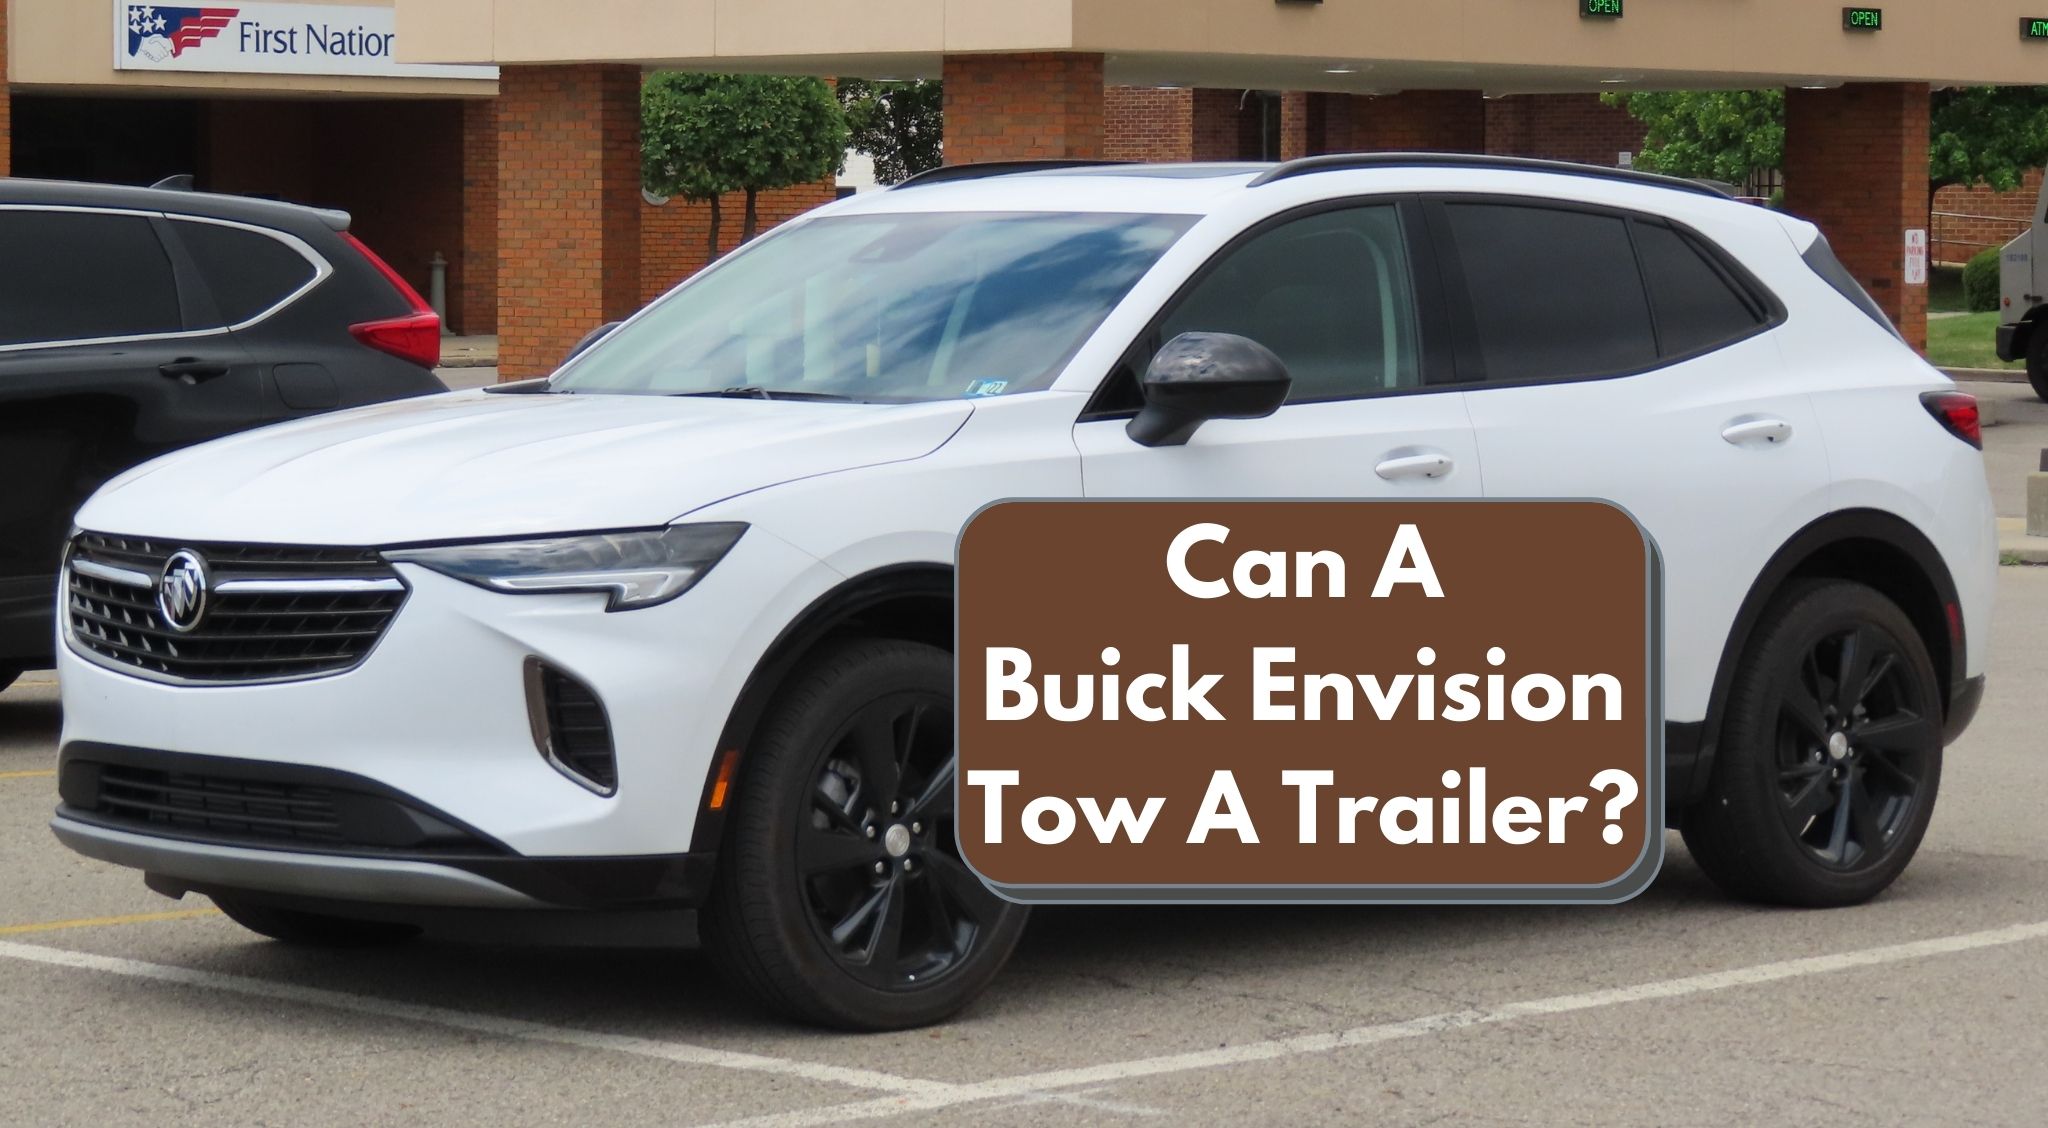 Can A Buick Envision Tow A Trailer